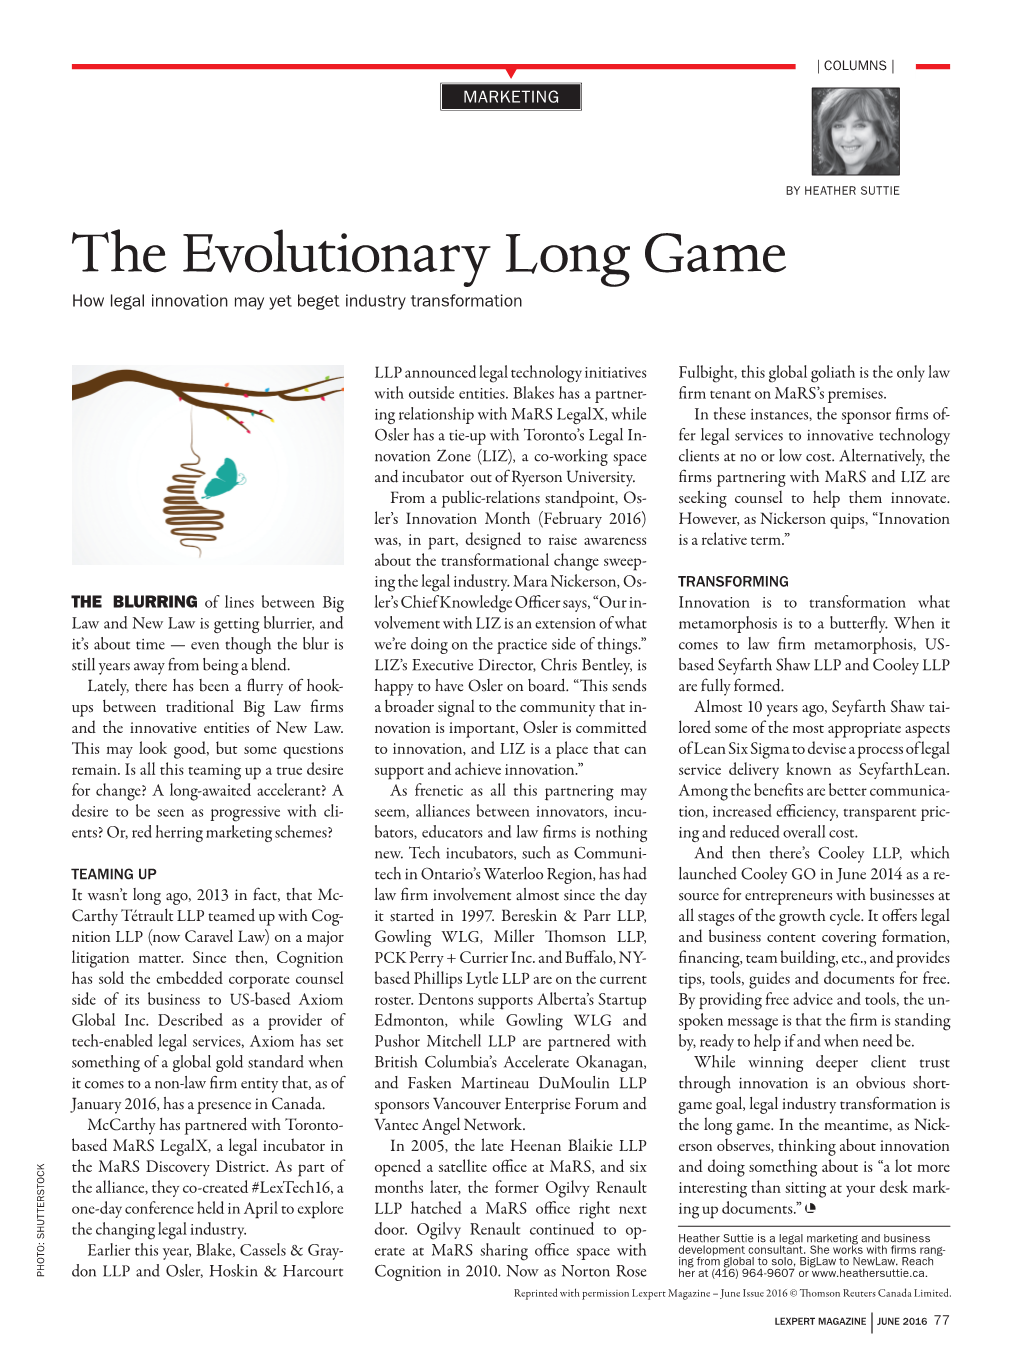 The Evolutionary Long Game How Legal Innovation May Yet Beget Industry Transformation